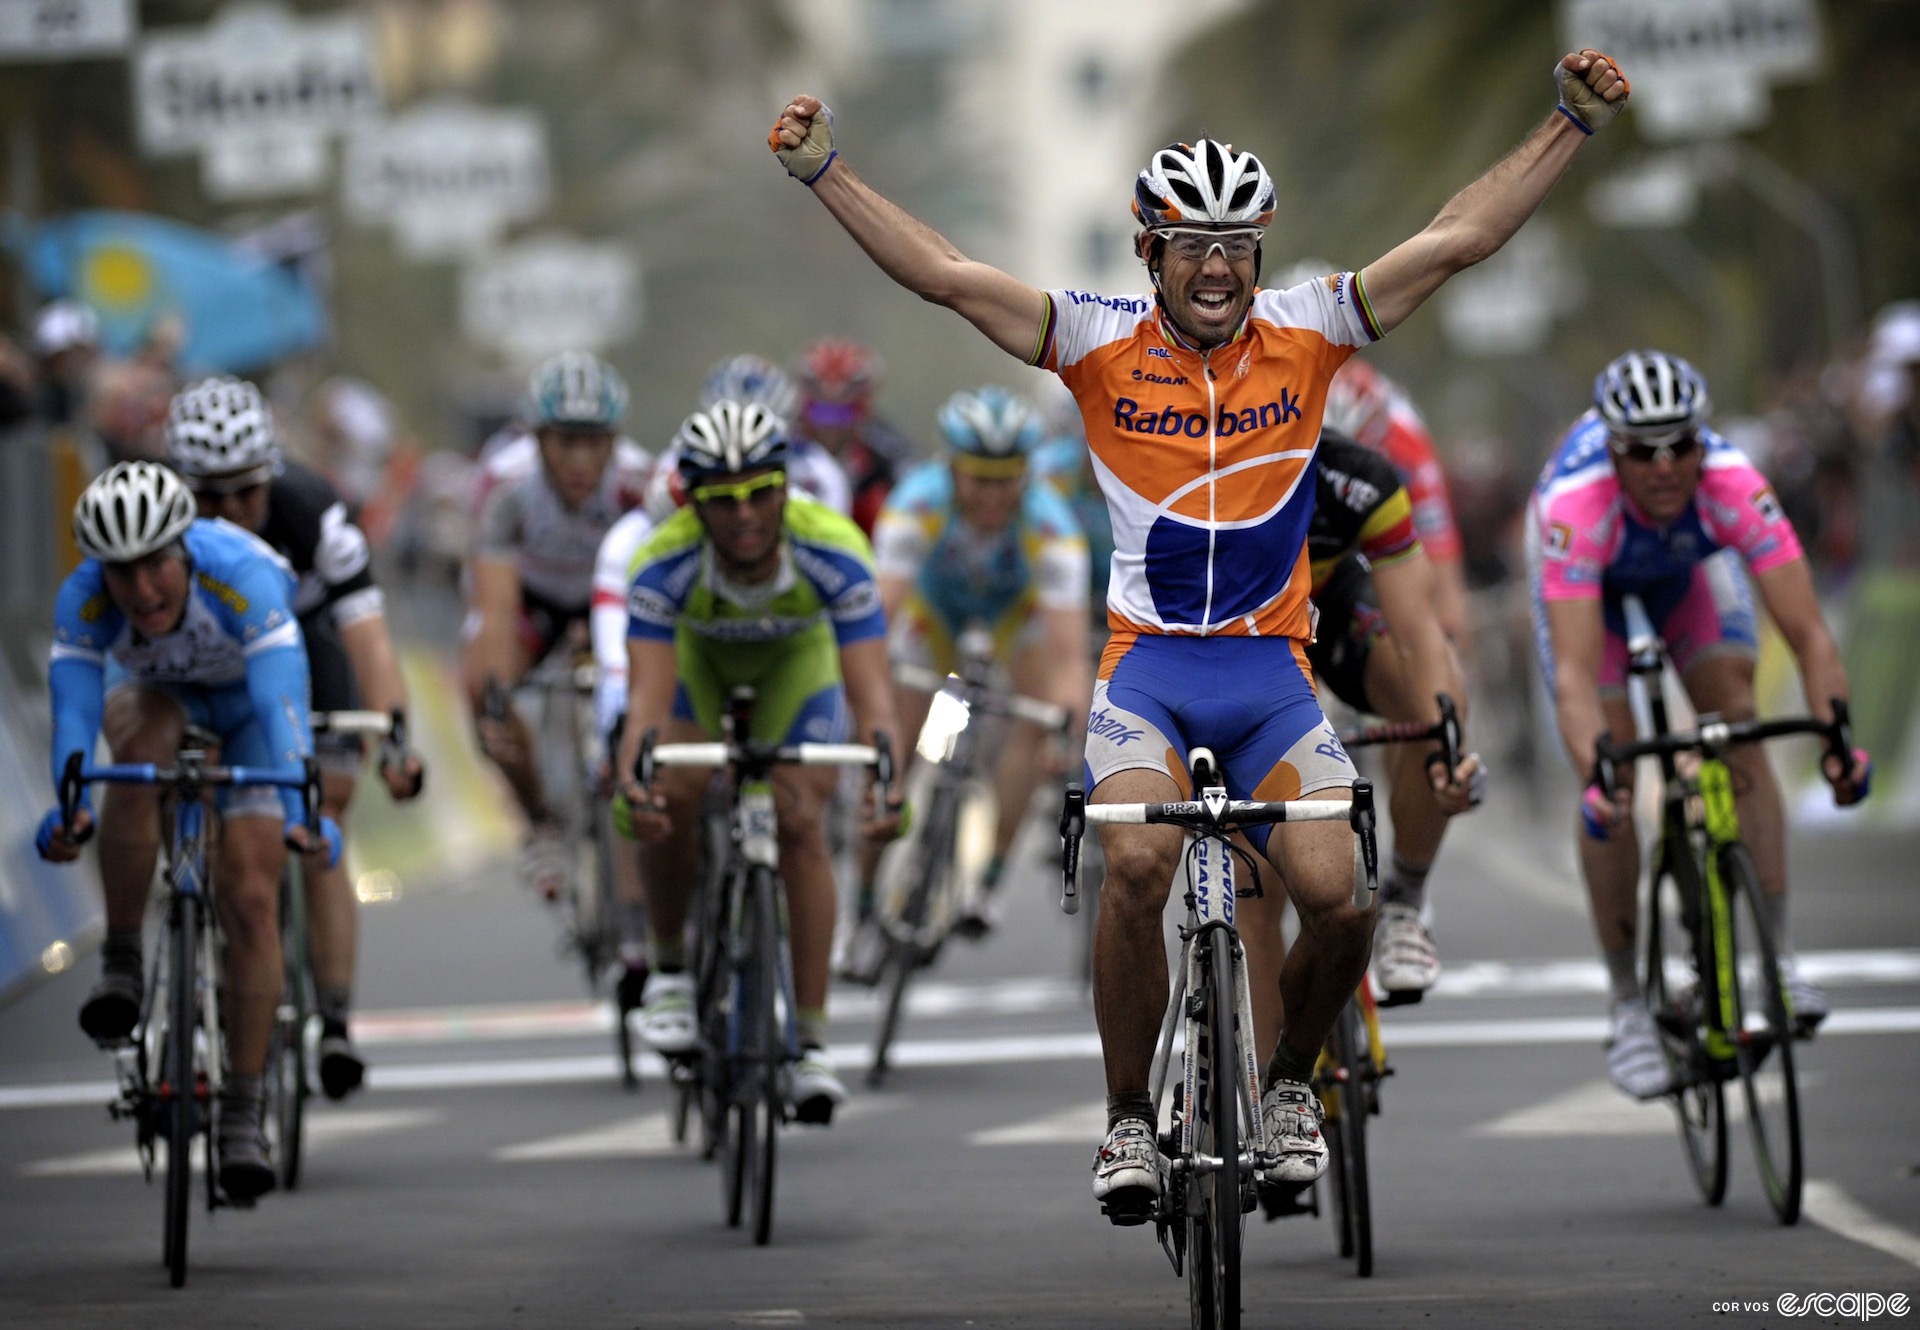 Óscar Freire wins Milan-San Remo, one of three times he did so as a pro. He is at the front of a field of riders, arms raised as he crosses the line well in front of his sprint rivals.